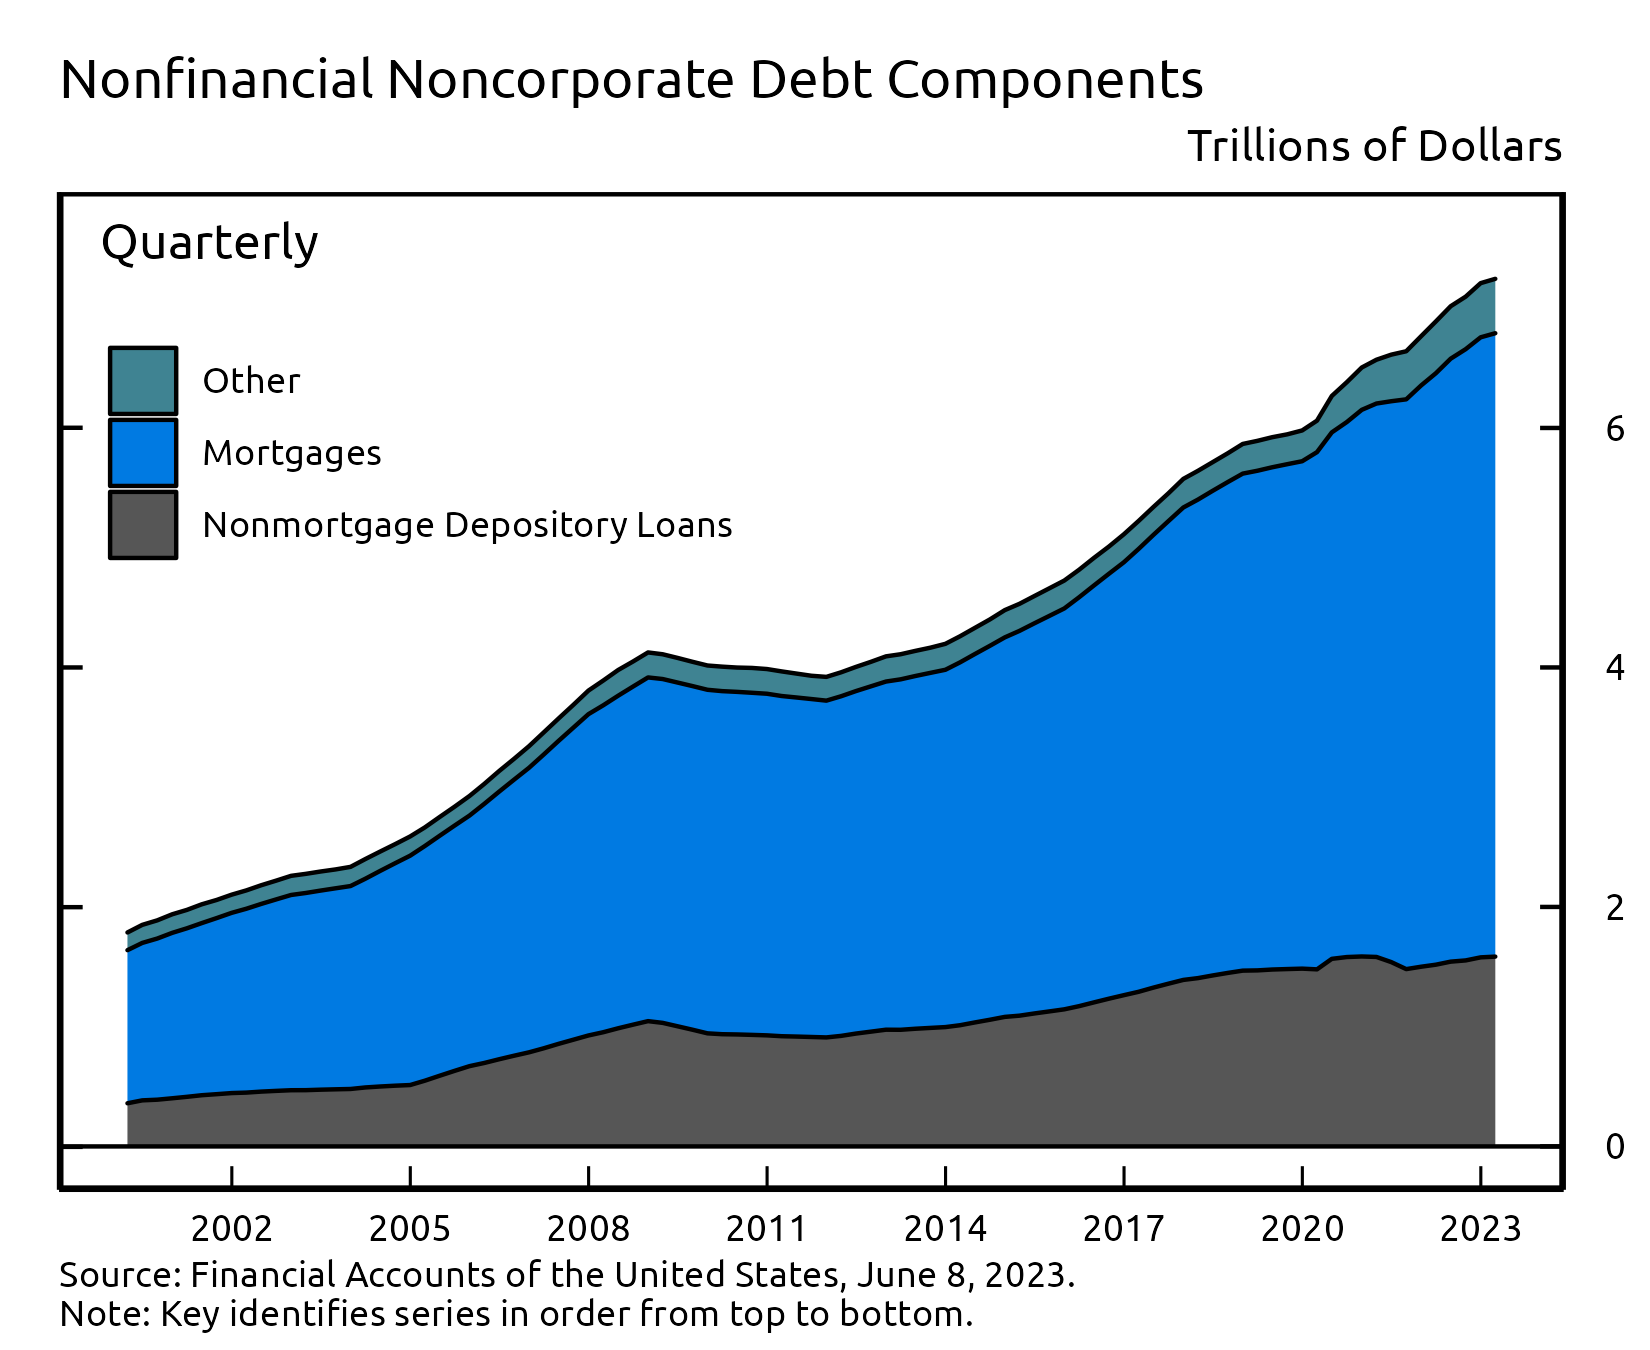 A stacked area chart showing total debt of US nonfinancial sectors as a share of GDP over time, with separate areas for component sectors. Time is plotted along the horizontal axis and dollars are plotted on the vertical axis